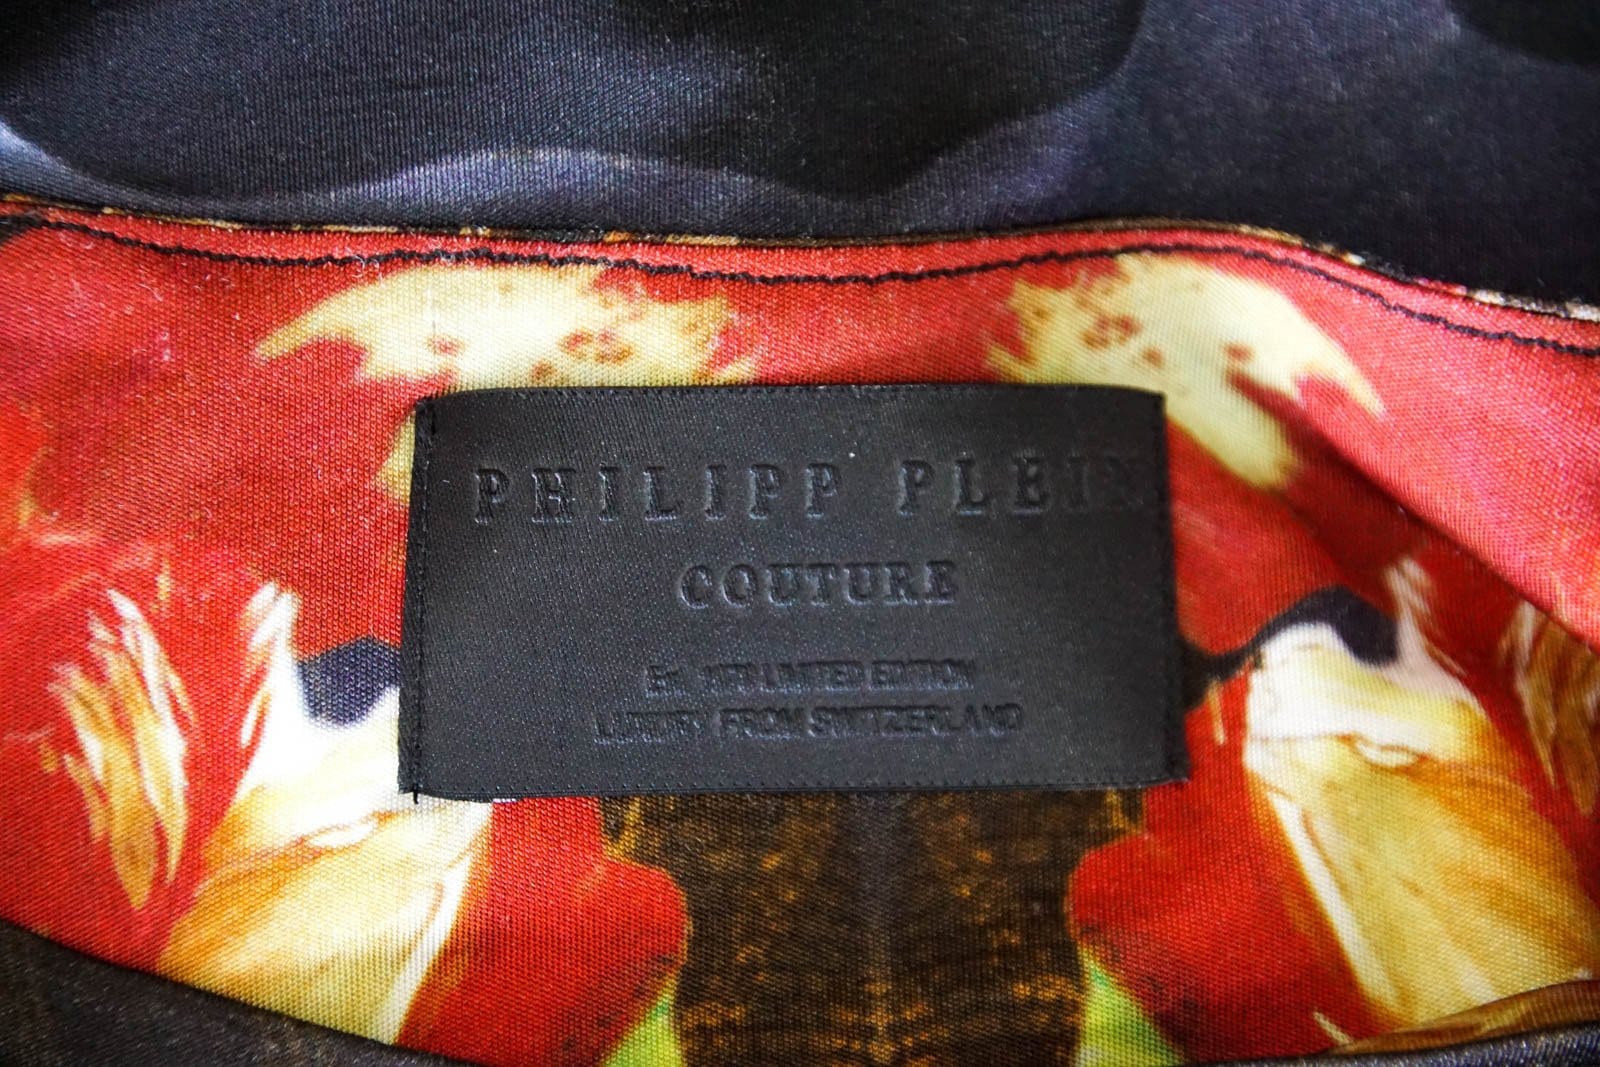 Philipp Plein Couture Dress Limited Edition Exotic Indian Print 3/4 Sleeve S - mightychic